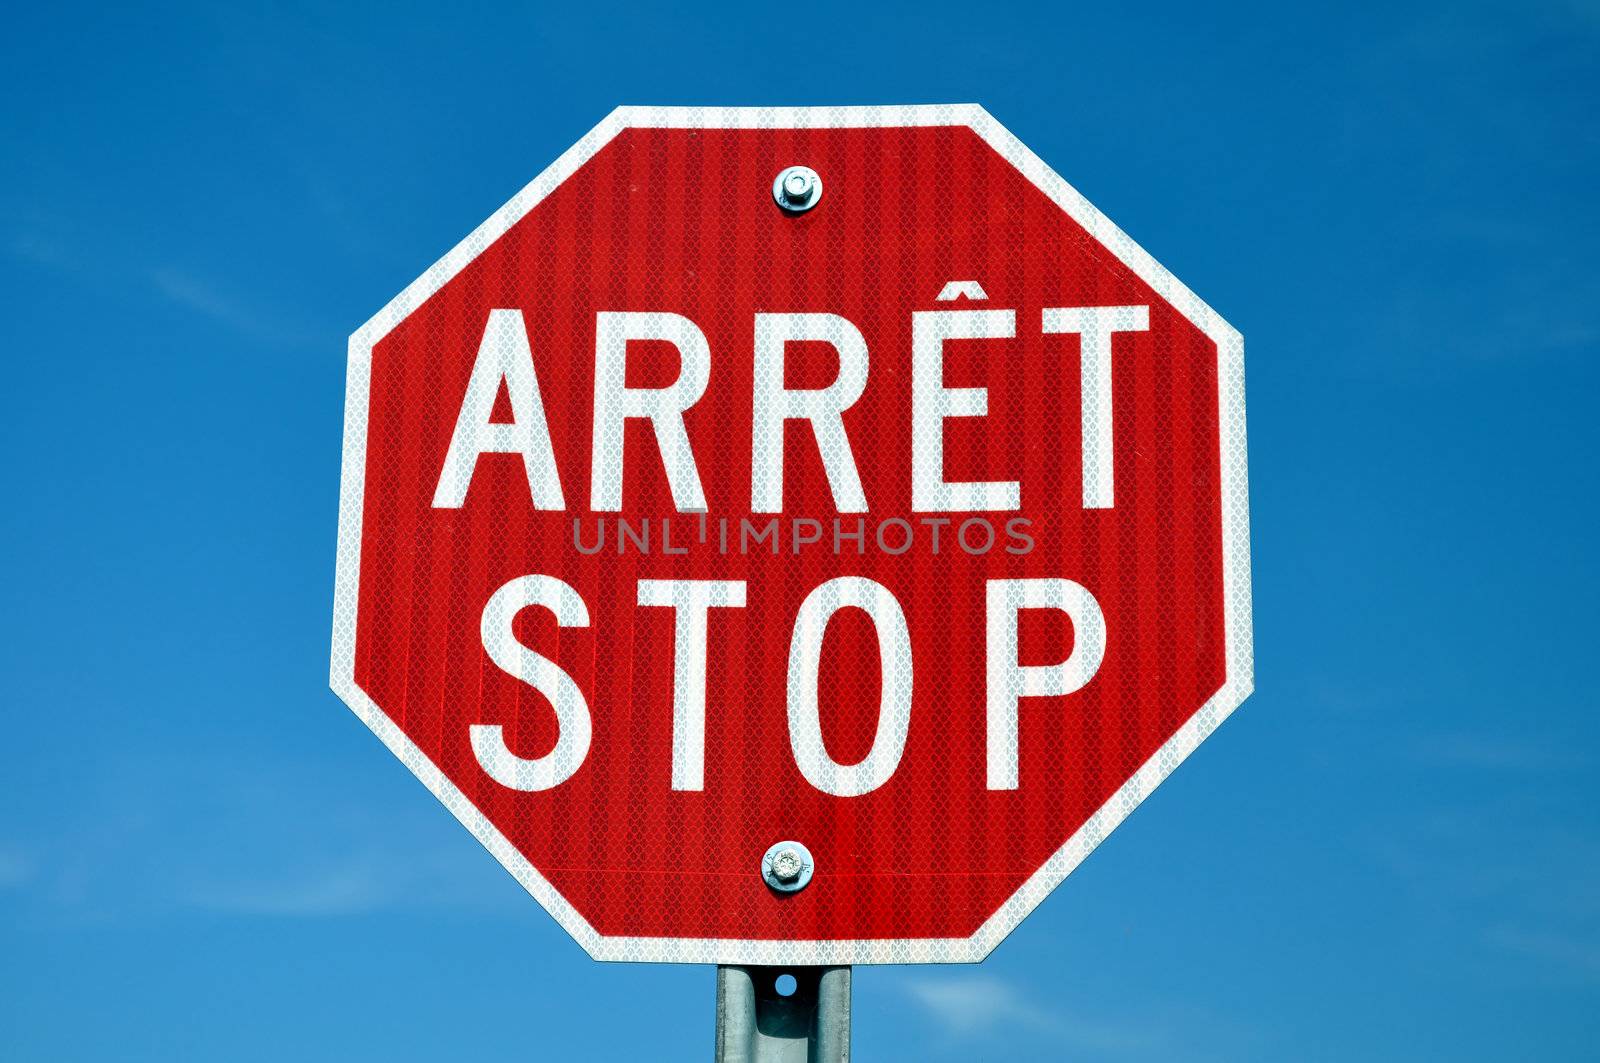 Bilingual French English stop sign in Quebec, Canada